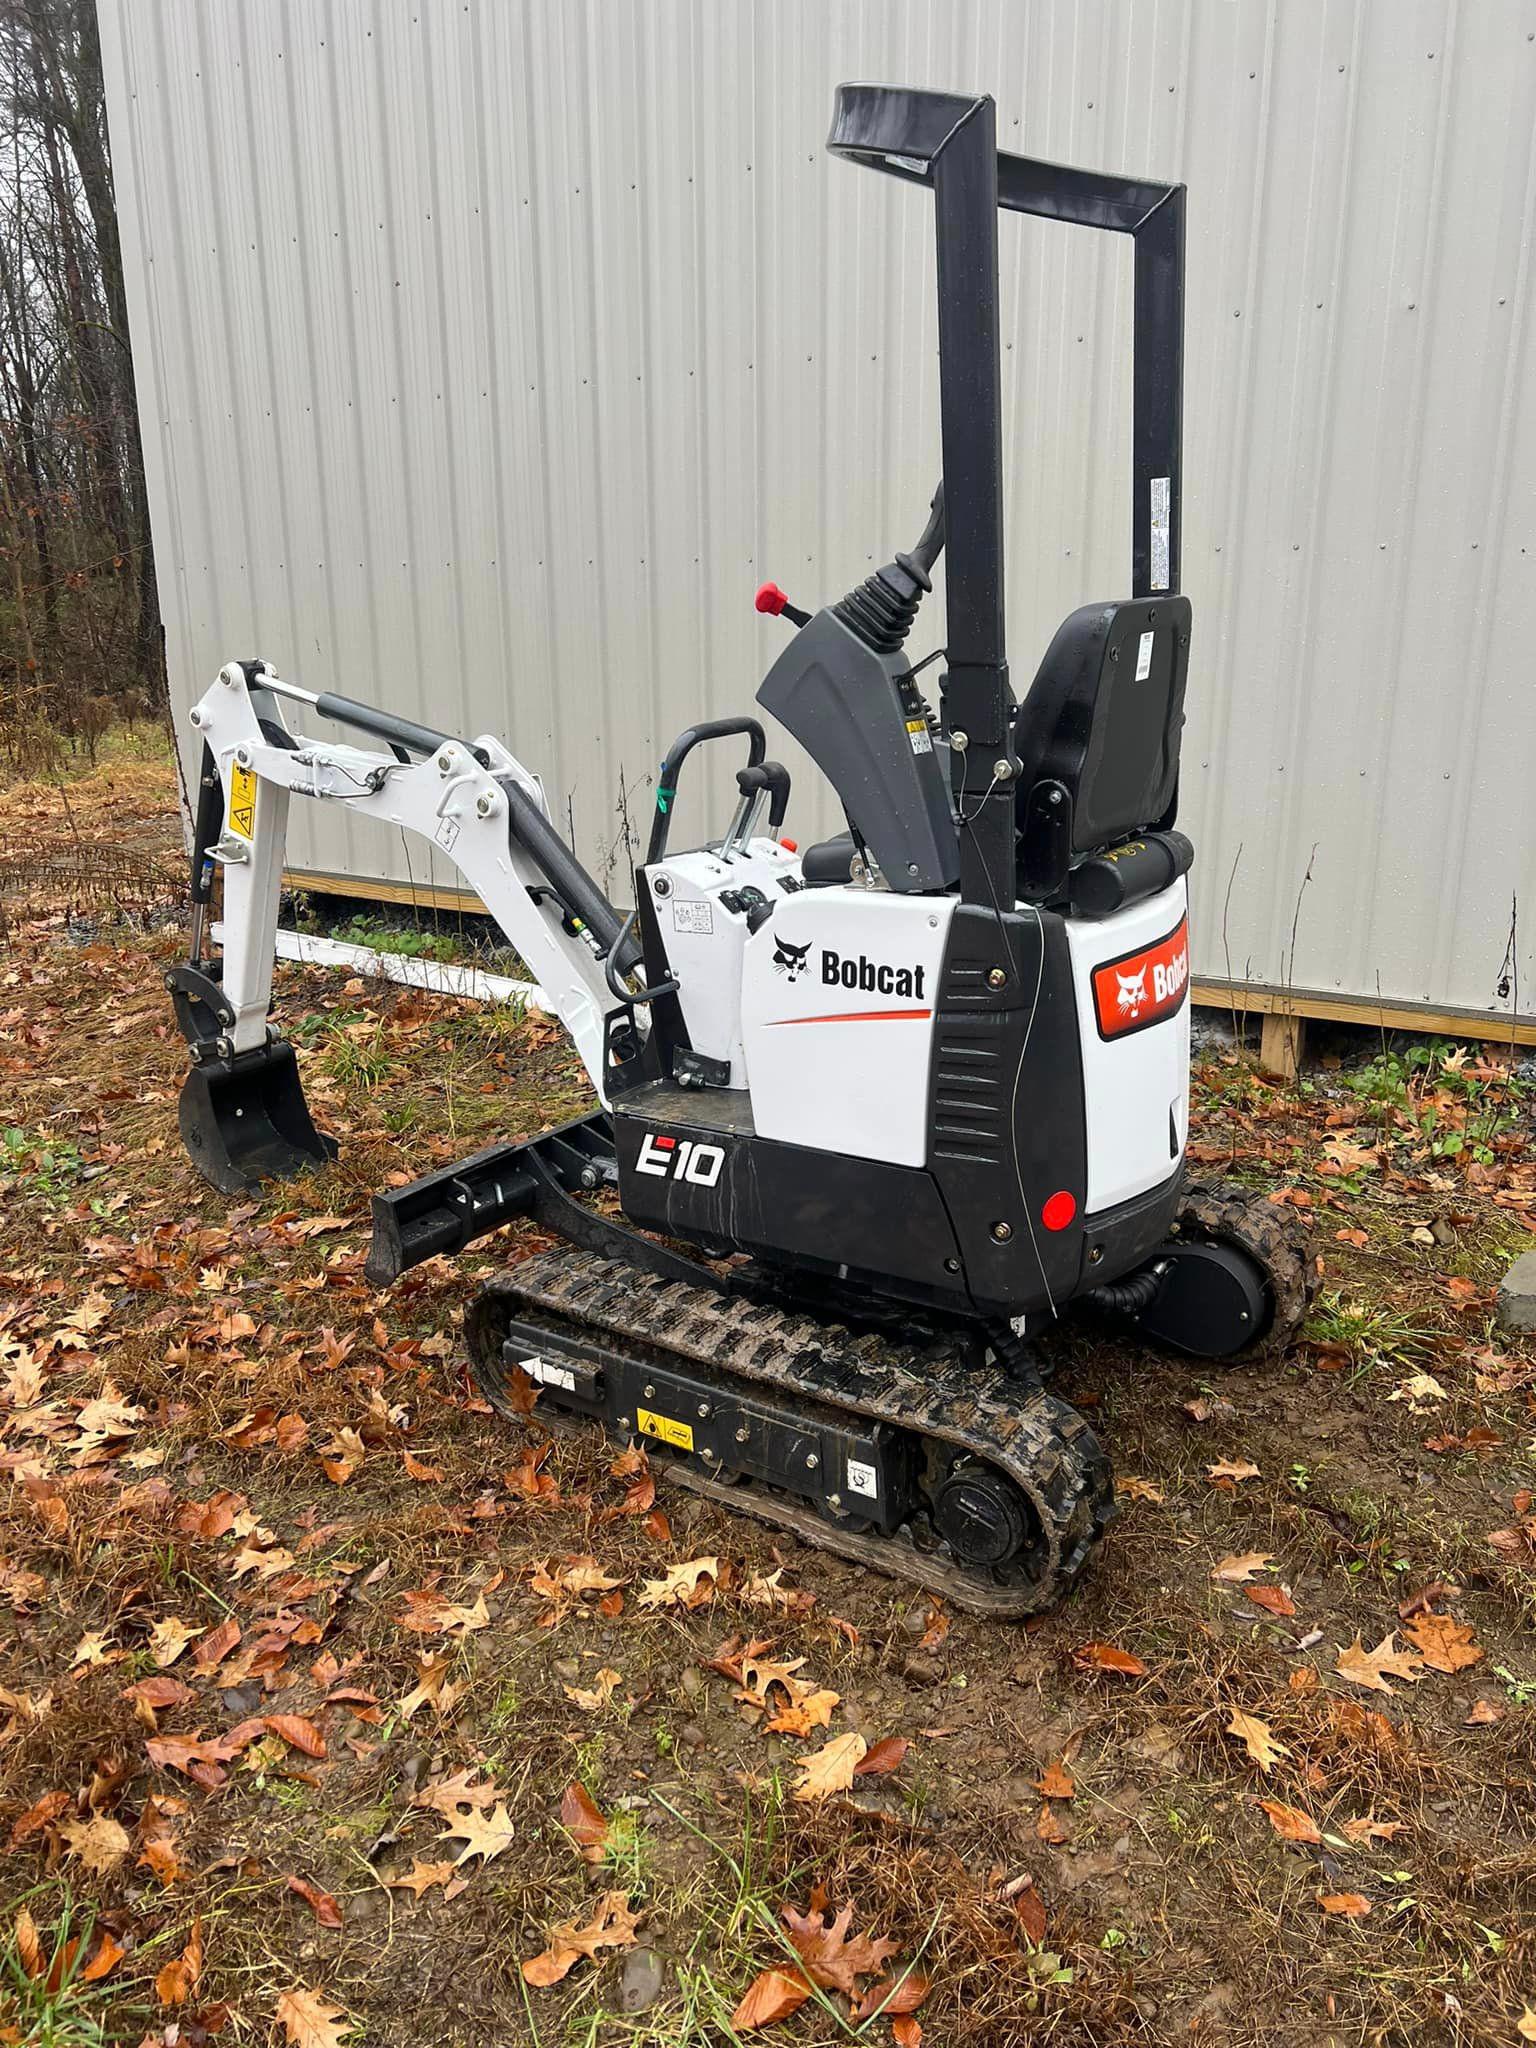 M&D Superior Rentals LLC offers mini excavator rental services for all your digging and earthmoving needs. Our fleet of compact and versatile mini excavators is perfect for tight spaces and smaller projects. With easy-to-use controls and powerful performance, our mini excavators help you tackle excavation, trenching, and landscaping tasks with efficiency and precision.